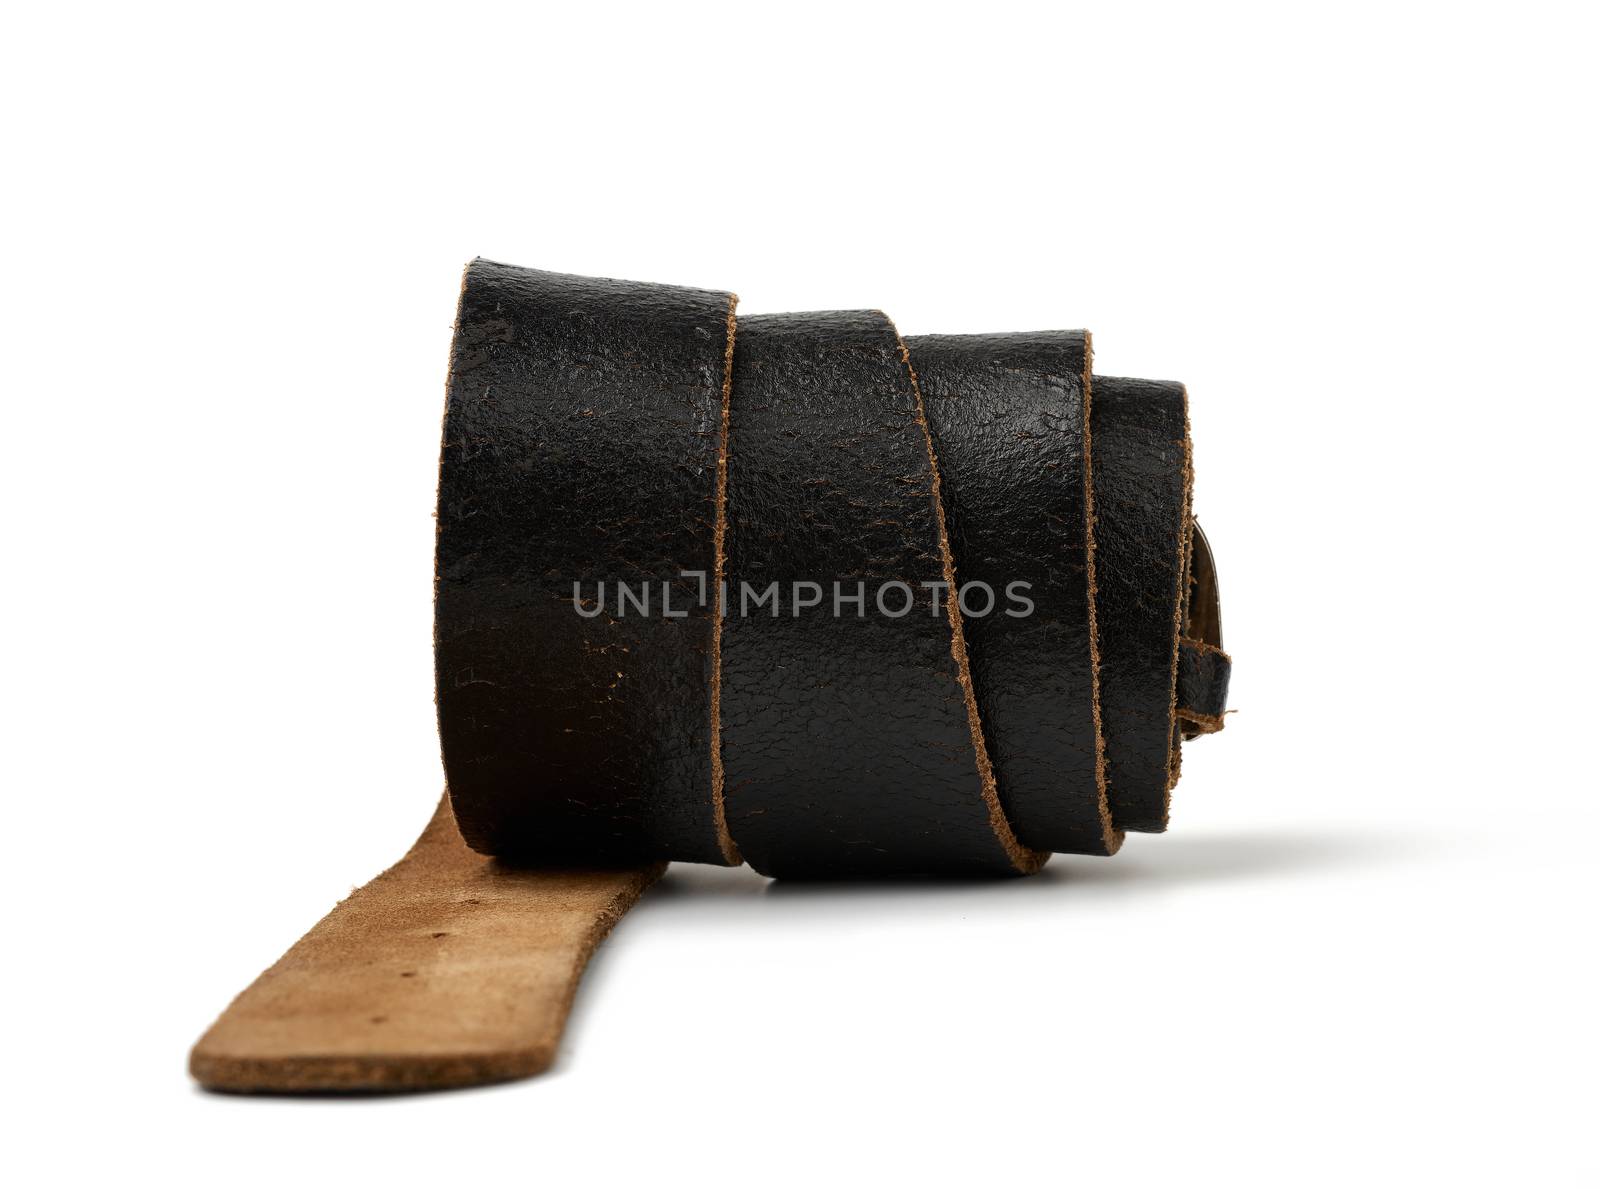 twisted brown leather vintage belt with metal buckle isolated on by ndanko